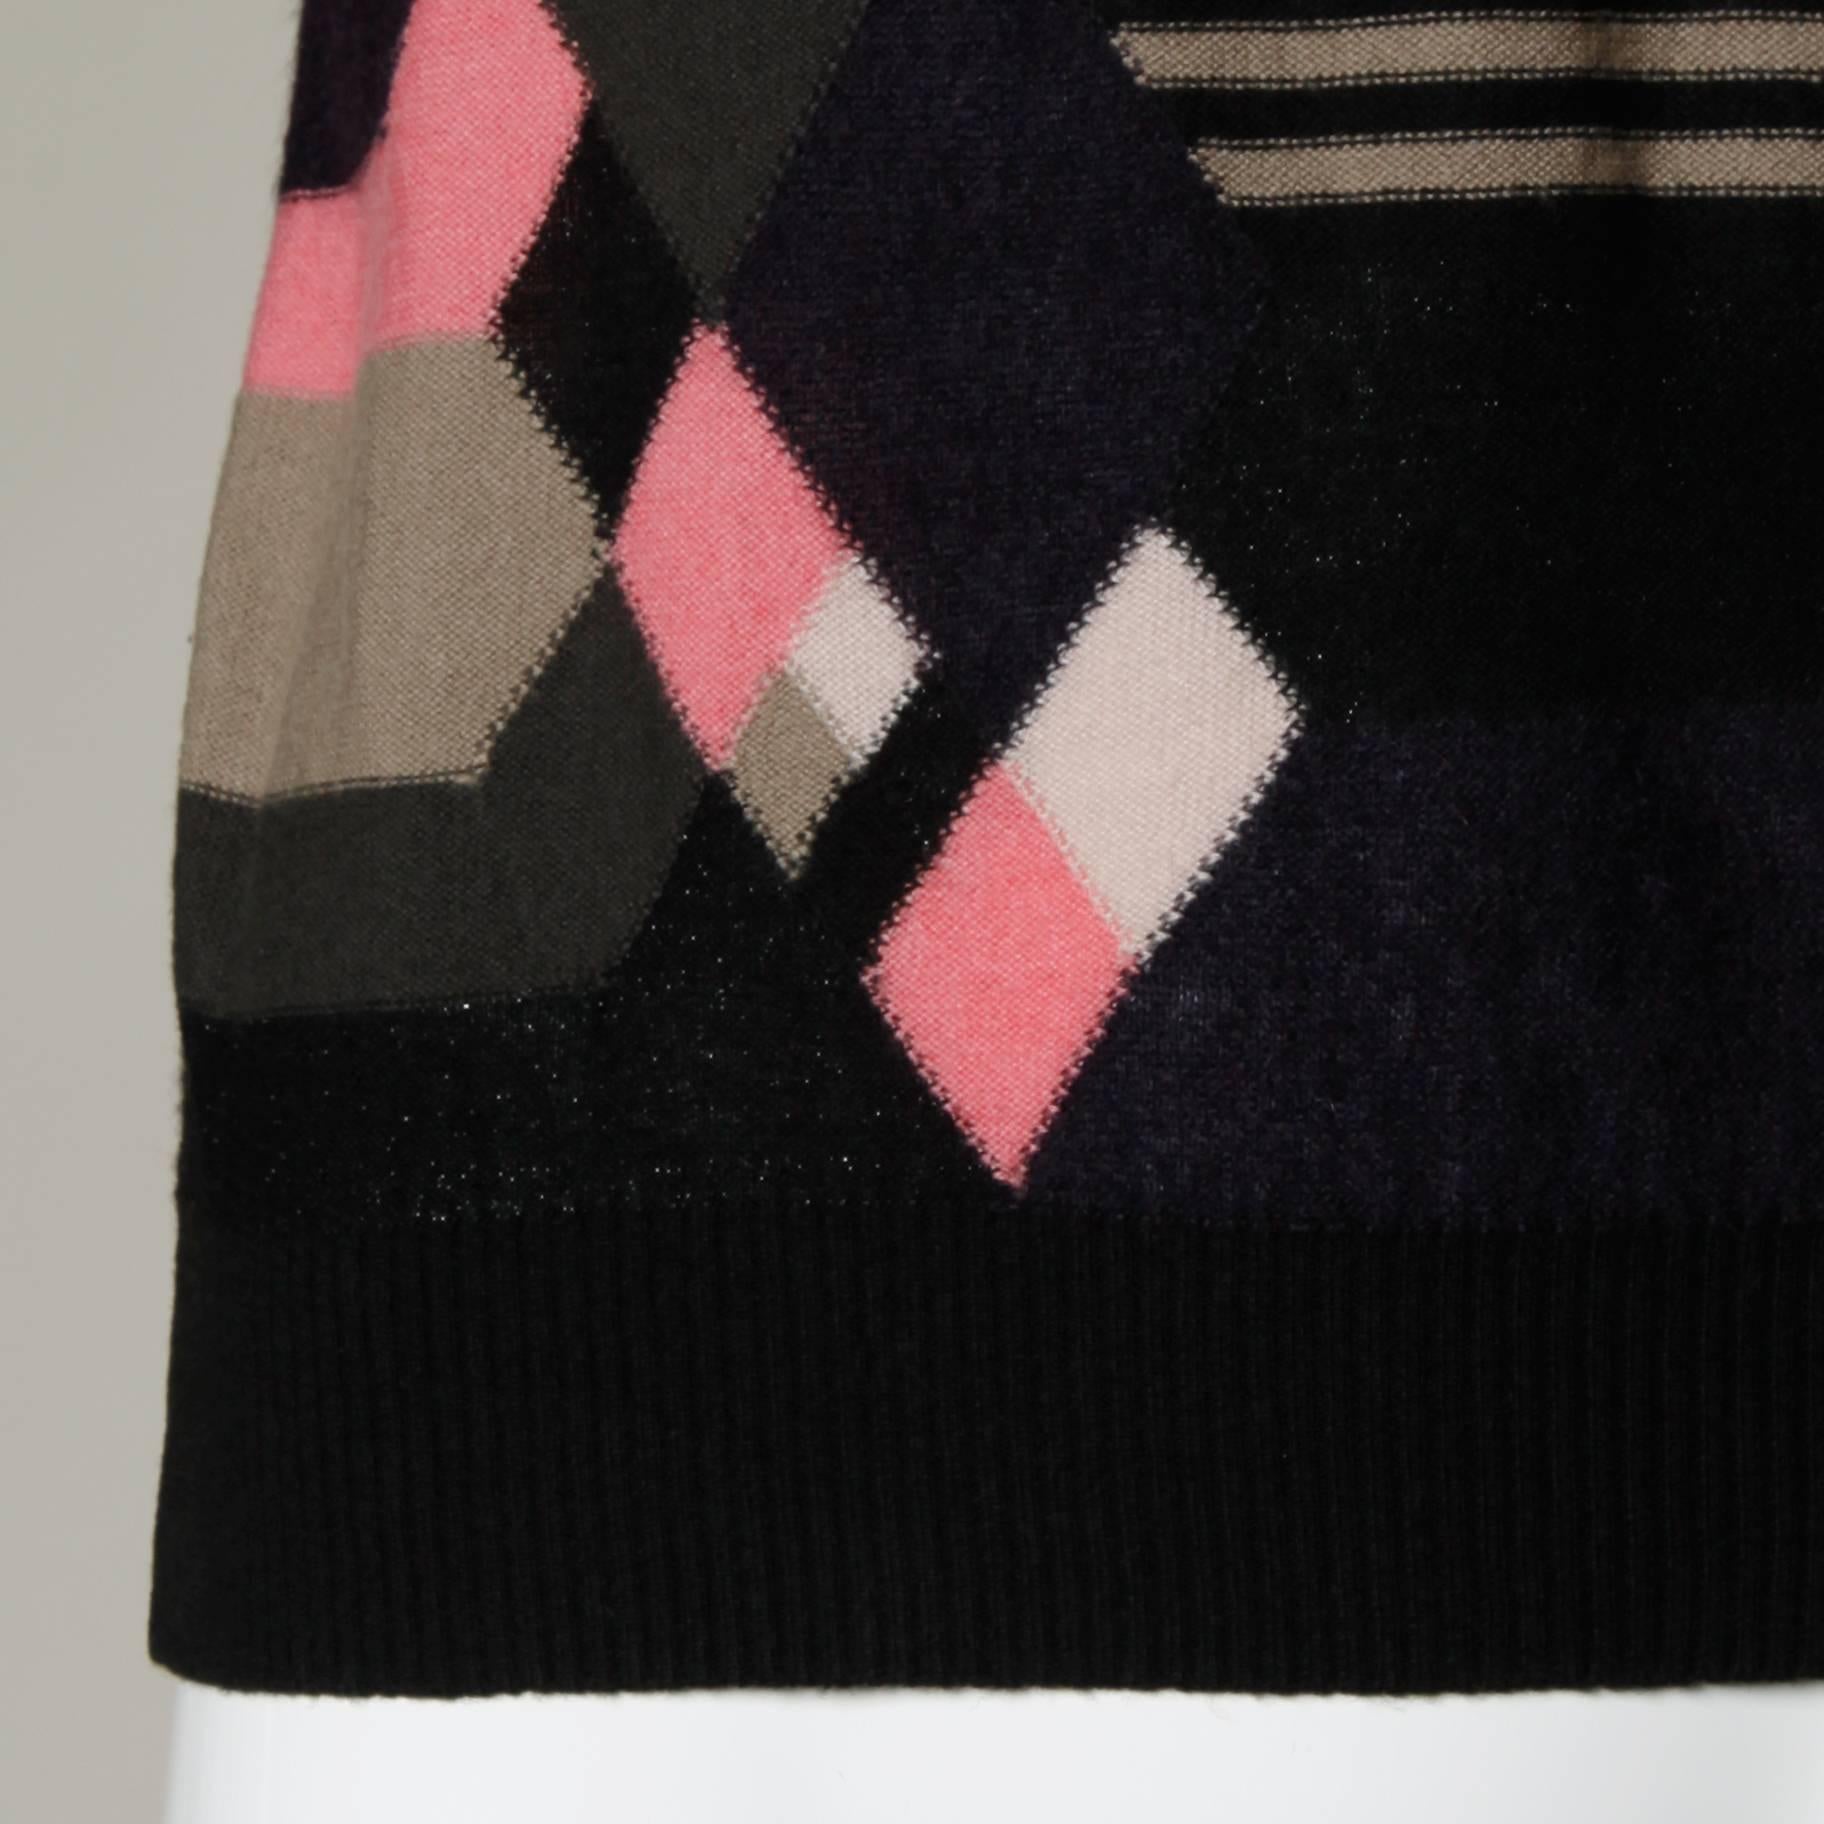 Sonia Rykiel Wool Cashmere Blend Knit Turtle Neck Sweater with Geometric Design 1